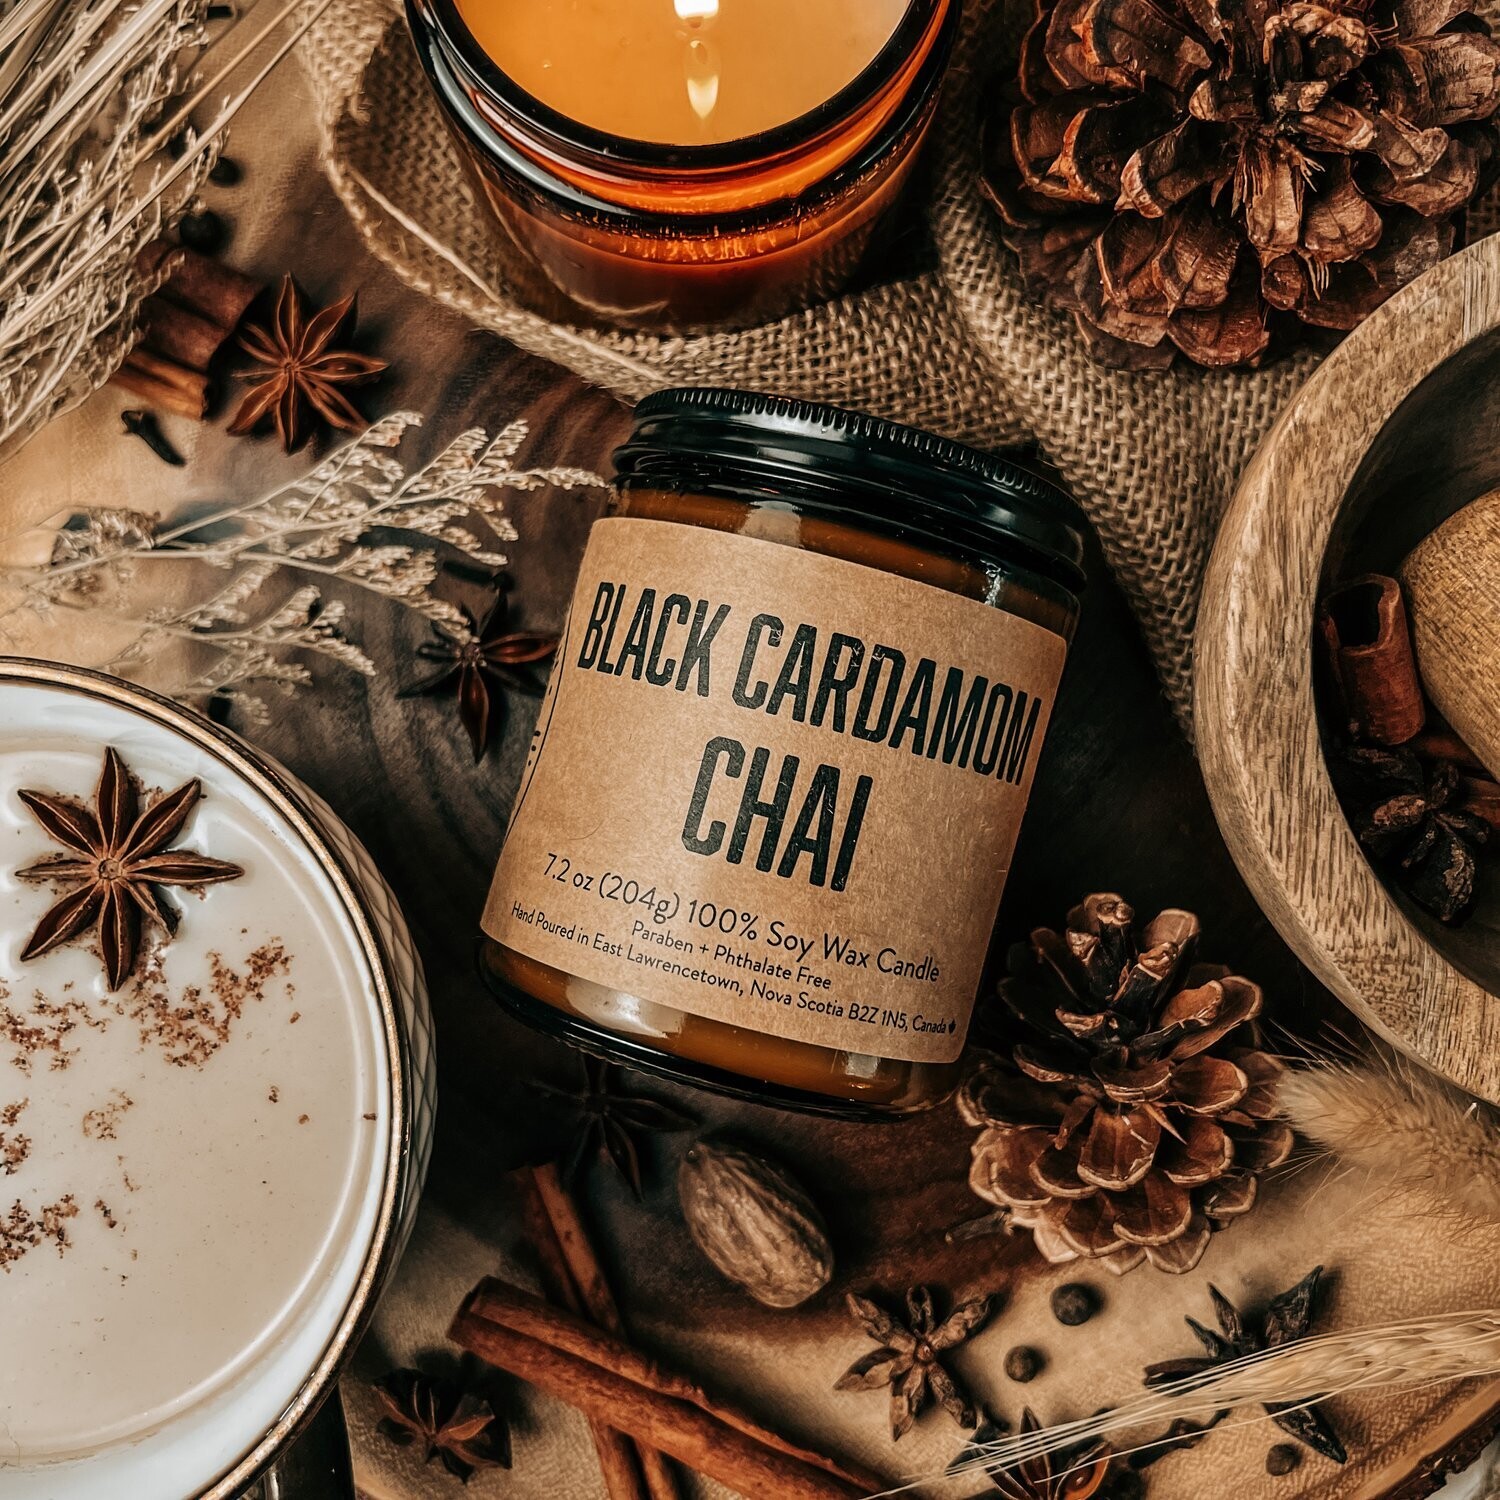 Black Chai Cardamom - Lawrencetown Candle Co